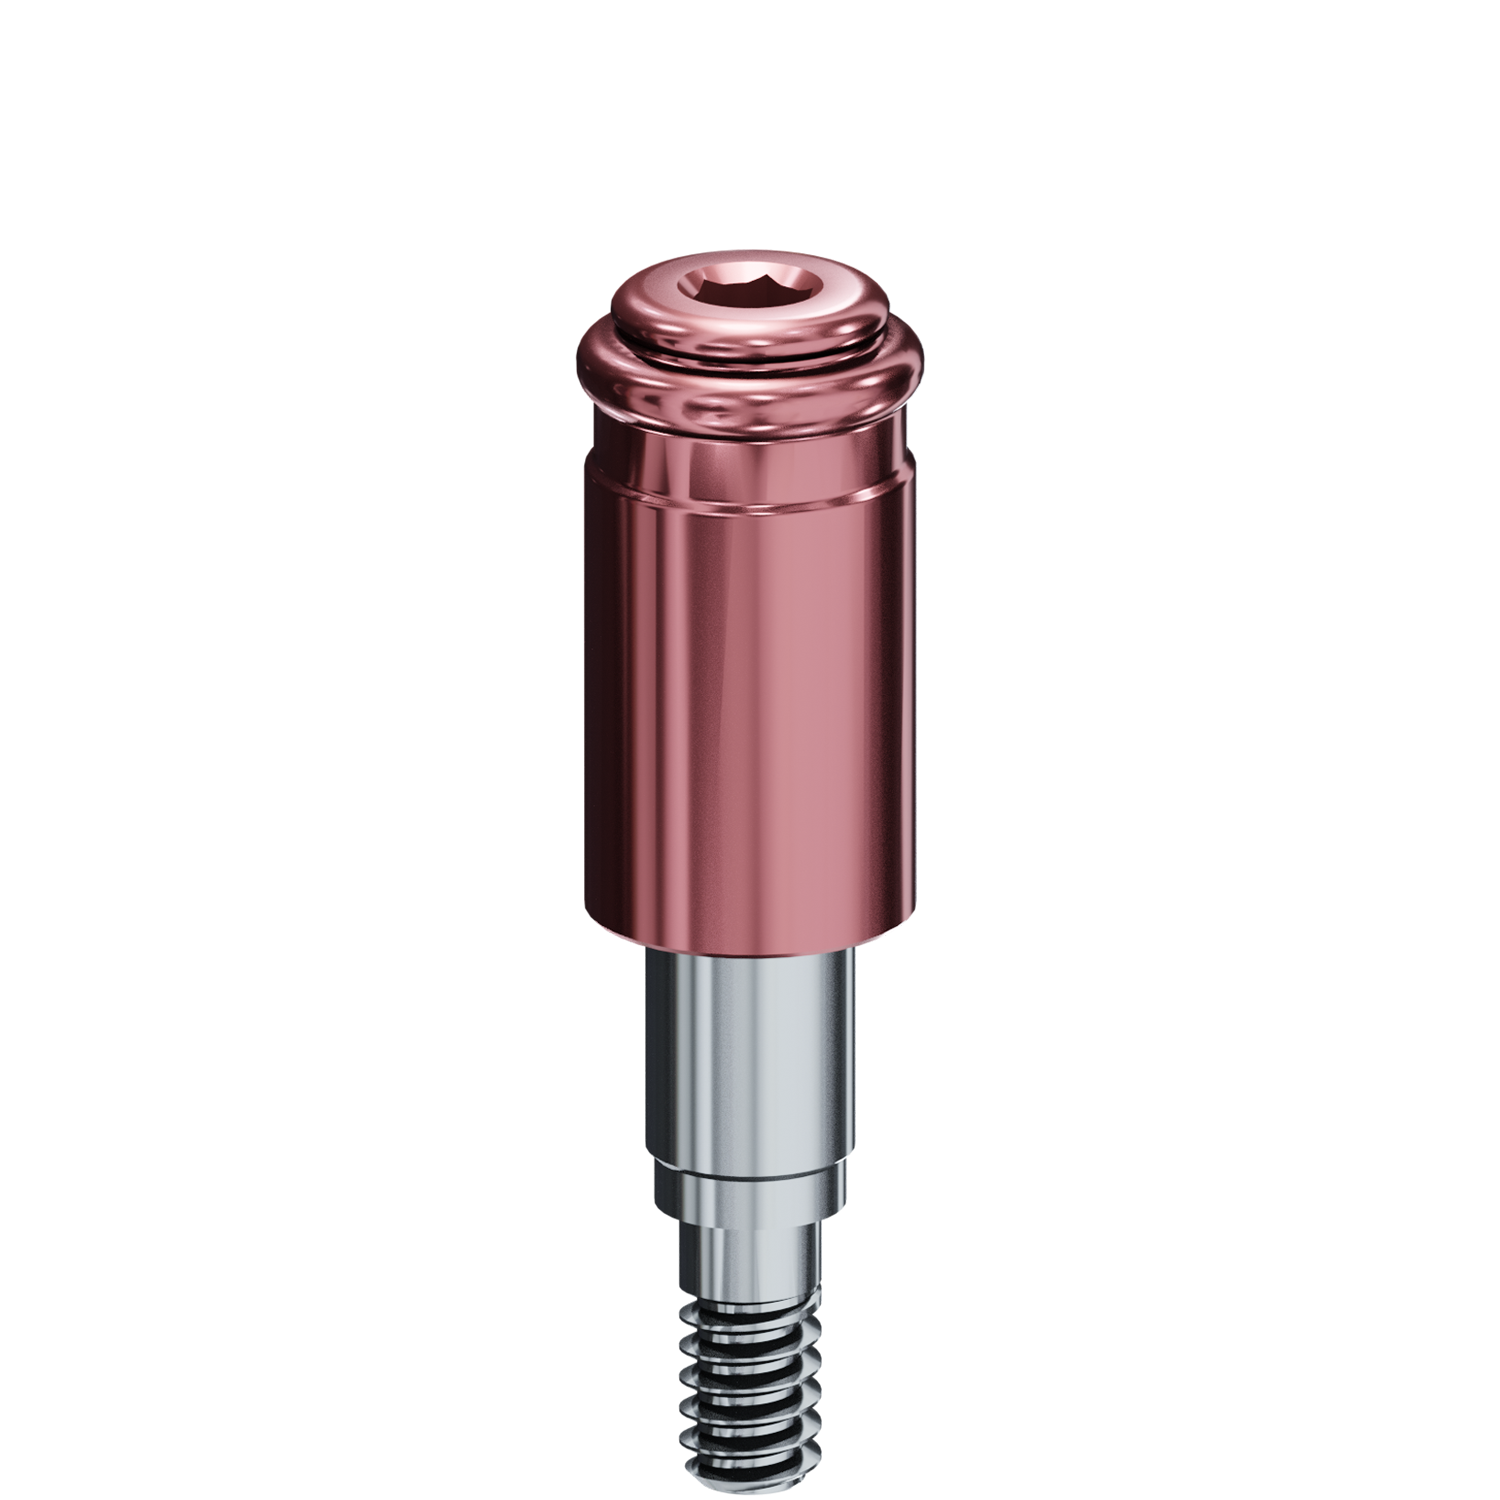 R-Tx Attachment System - 3.4mm Biomet 3i® Certain Connection - 048" Drive - 3.0mm